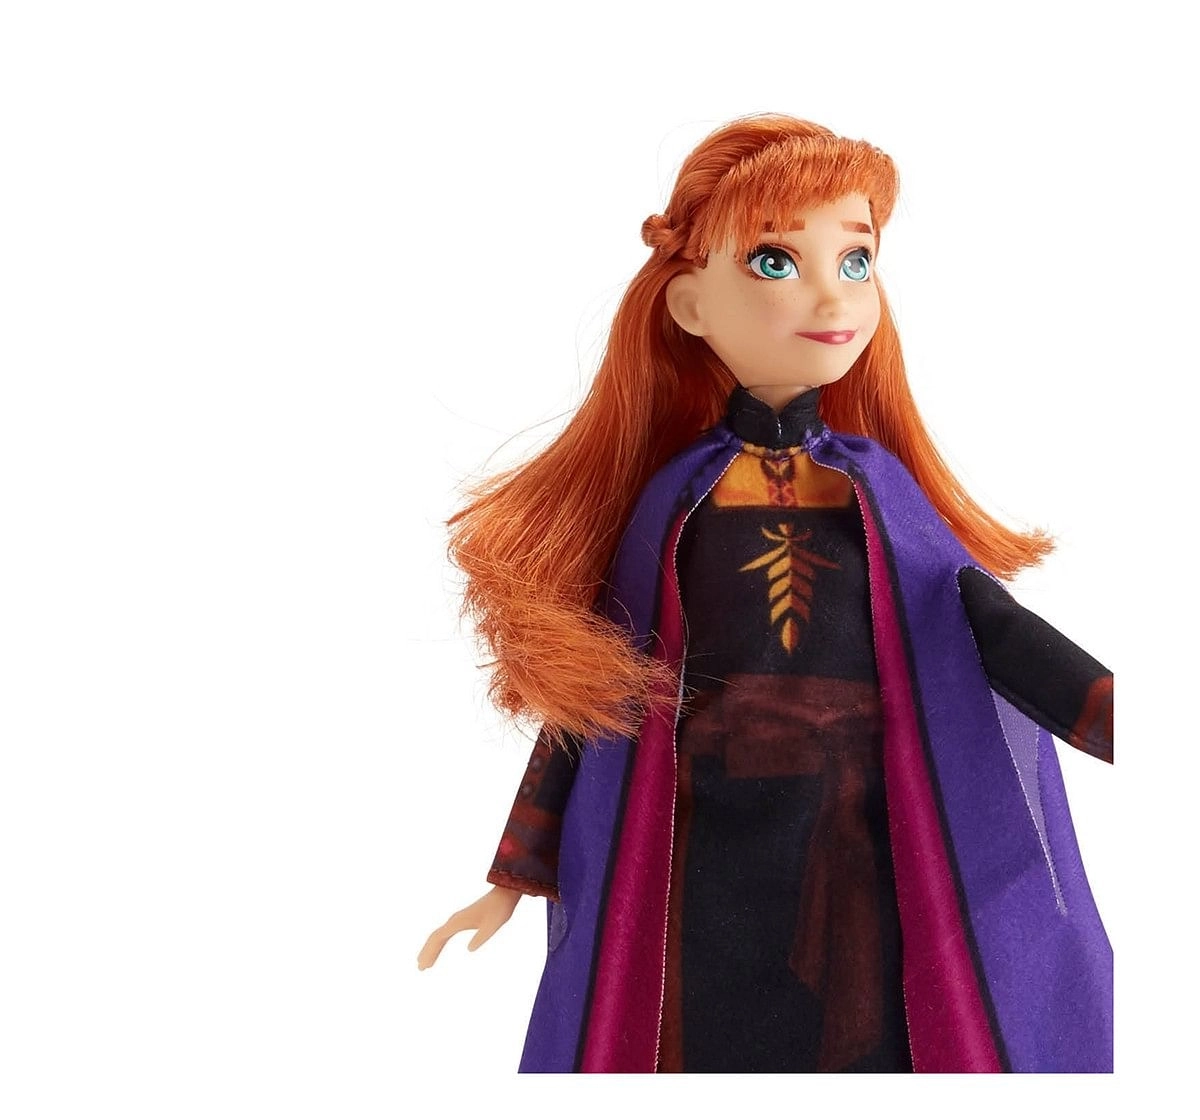 Disney Frozen 2 Anna Fashion Doll With Long Red Hair And Outfit Inspired By Frozen 2 Dolls & Accessories for age 3Y+ 